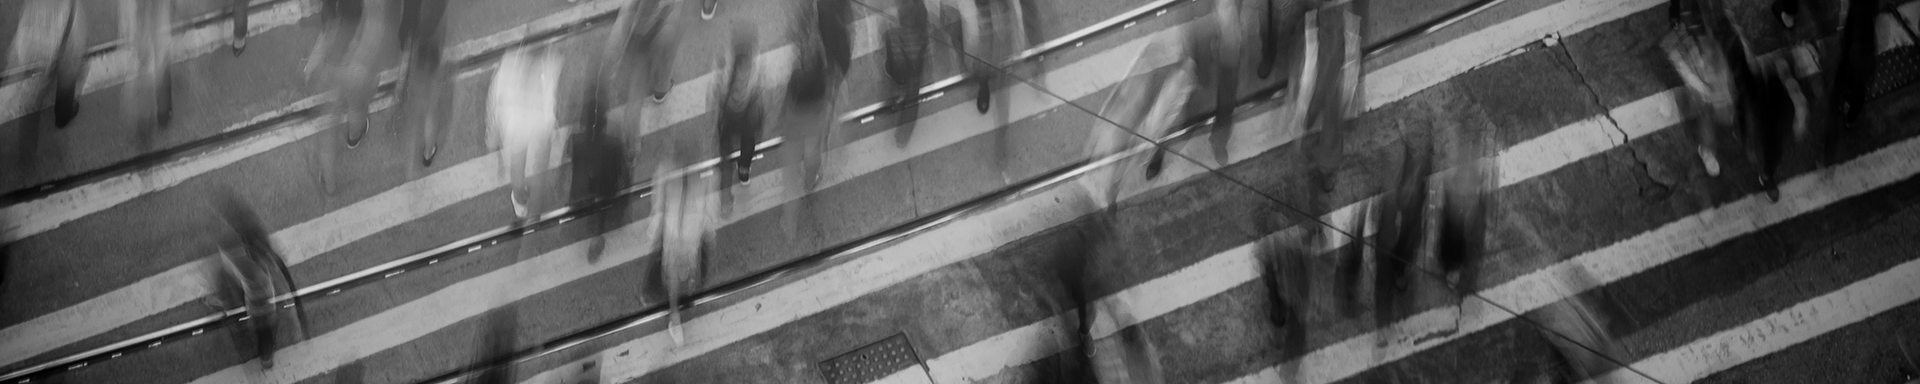 Blurred image of people moving in crosswalk. Pexels photo by Mike Chai.